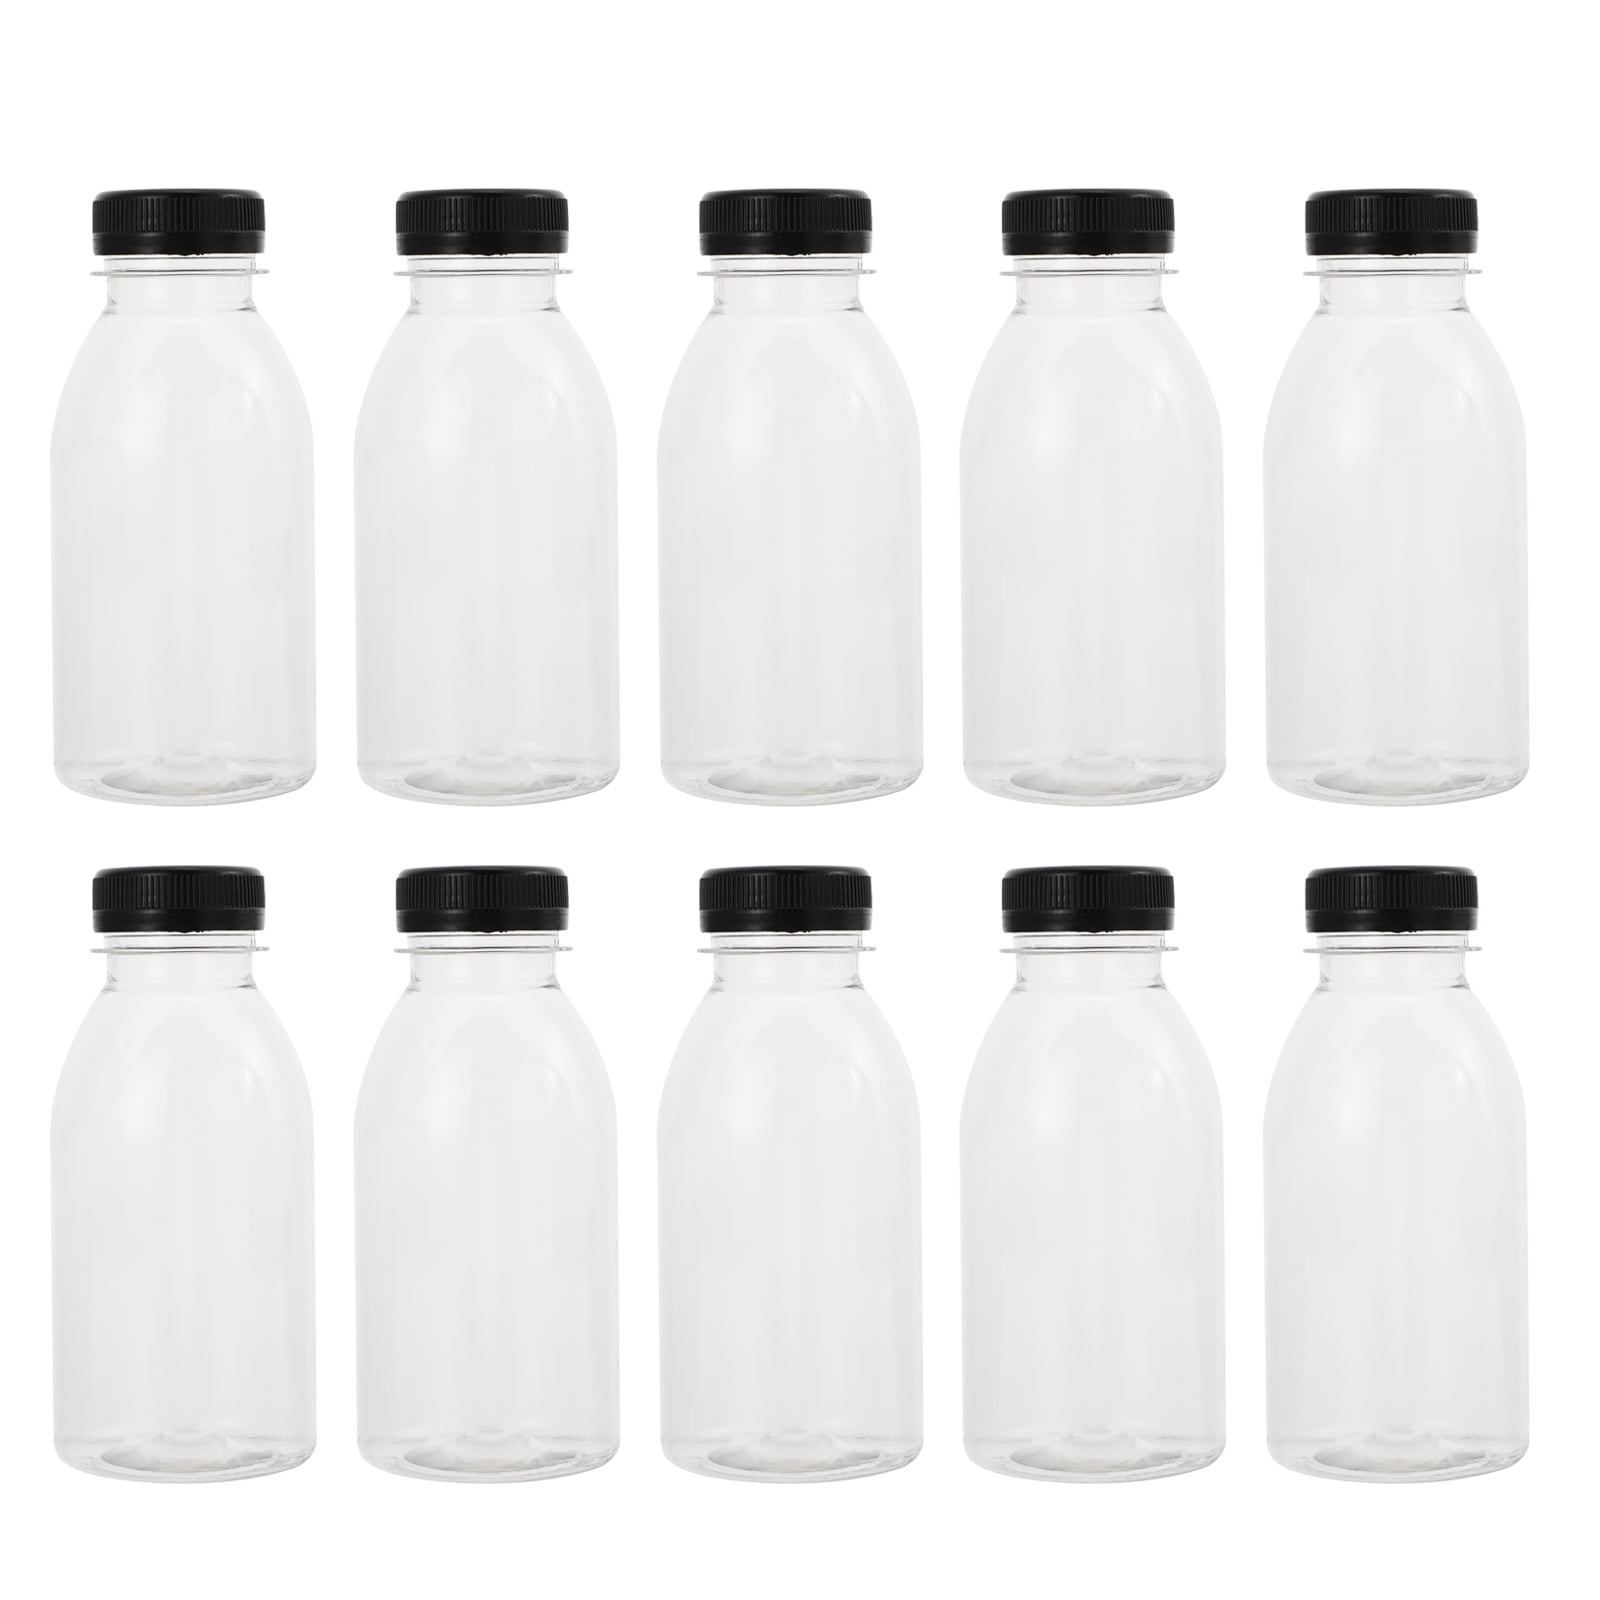 Juice Bottles with Caps for Juicing & Smoothies, Reusable Clear Empty  Plastic Bottles with Caps, 550ml Drink Containers for Mini Fridge, Juicer  Shots